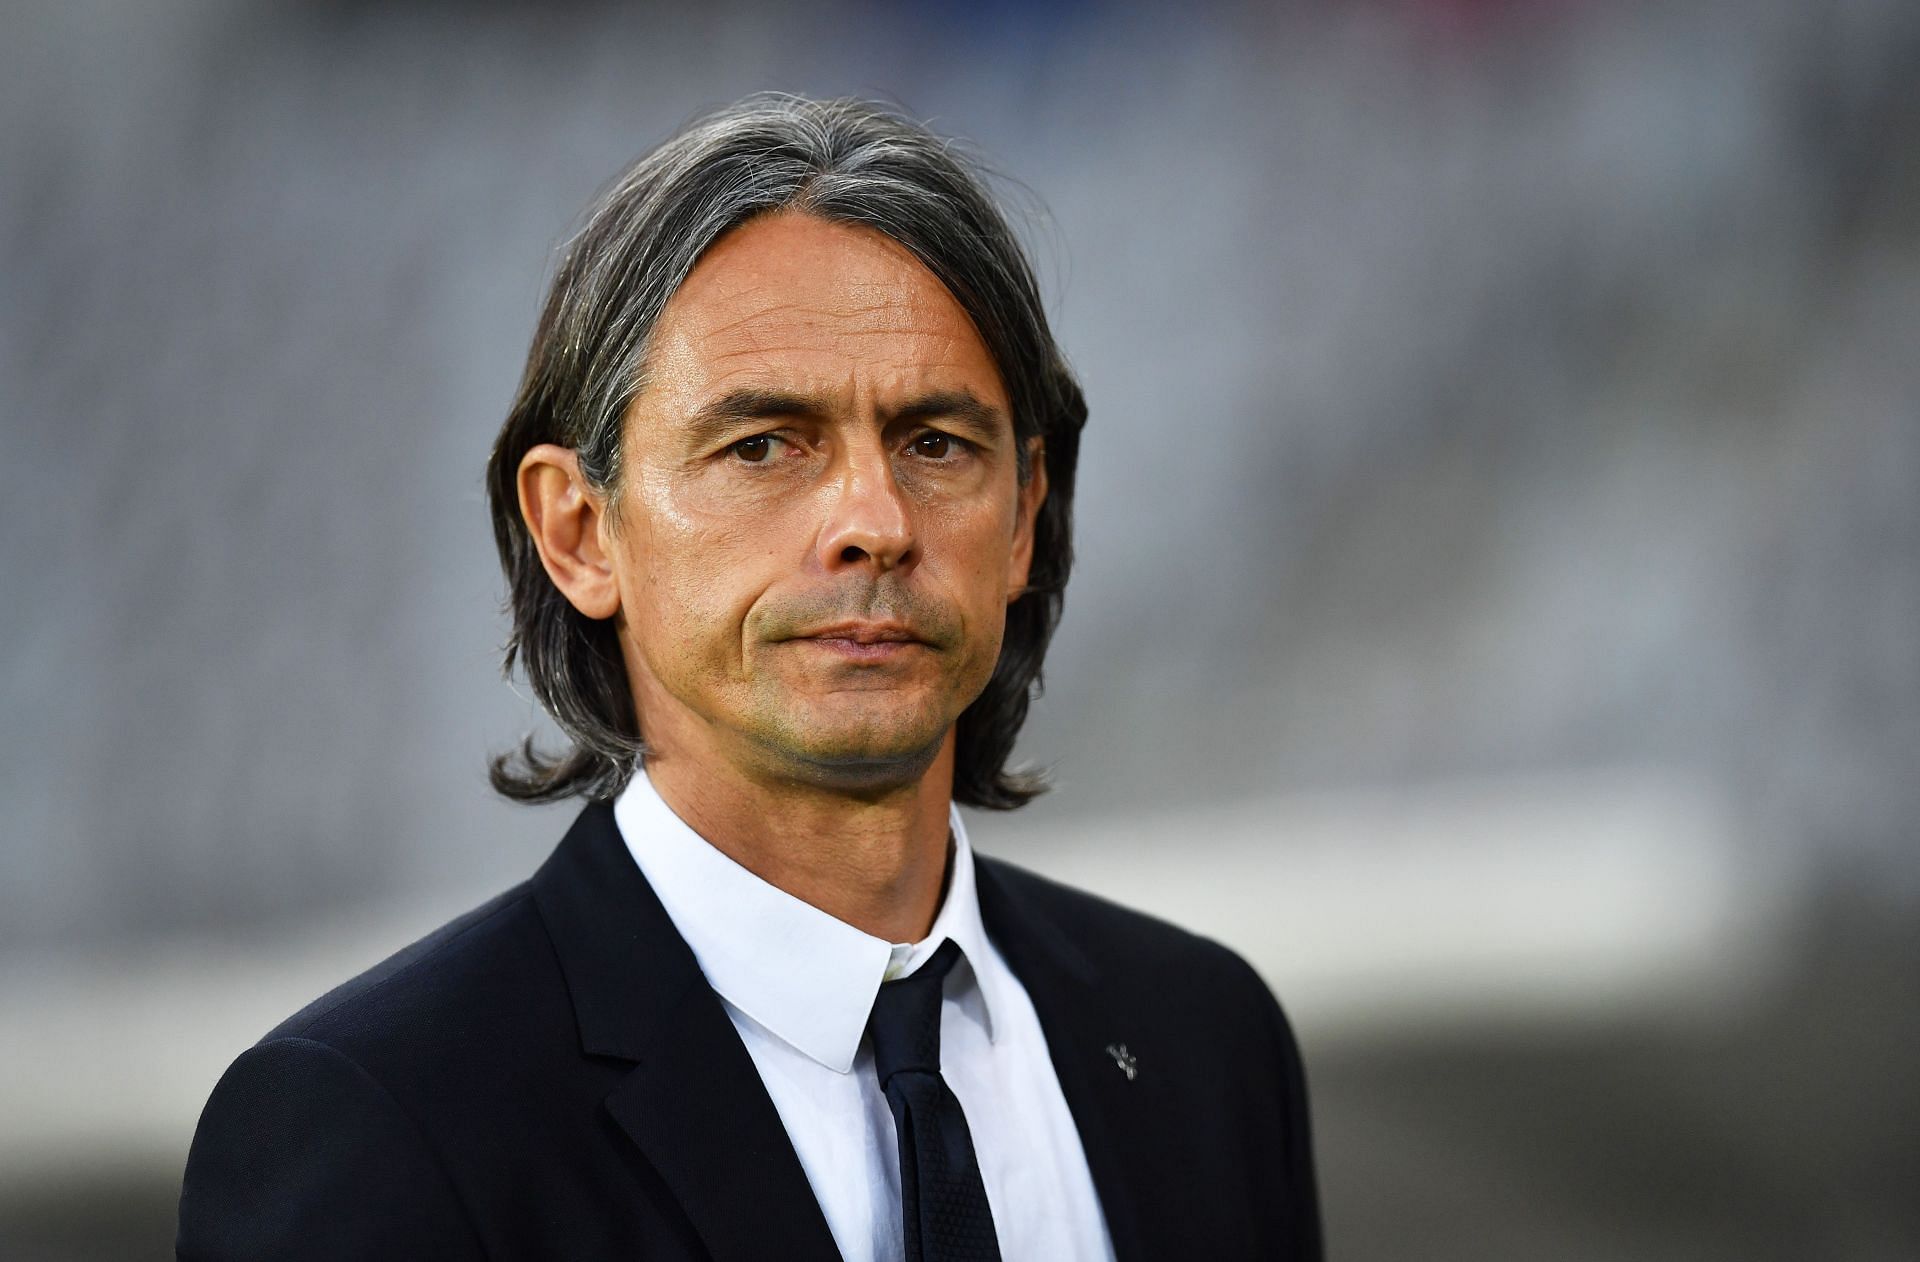 Filippo Inzaghi turned to management after retiring from professional football.